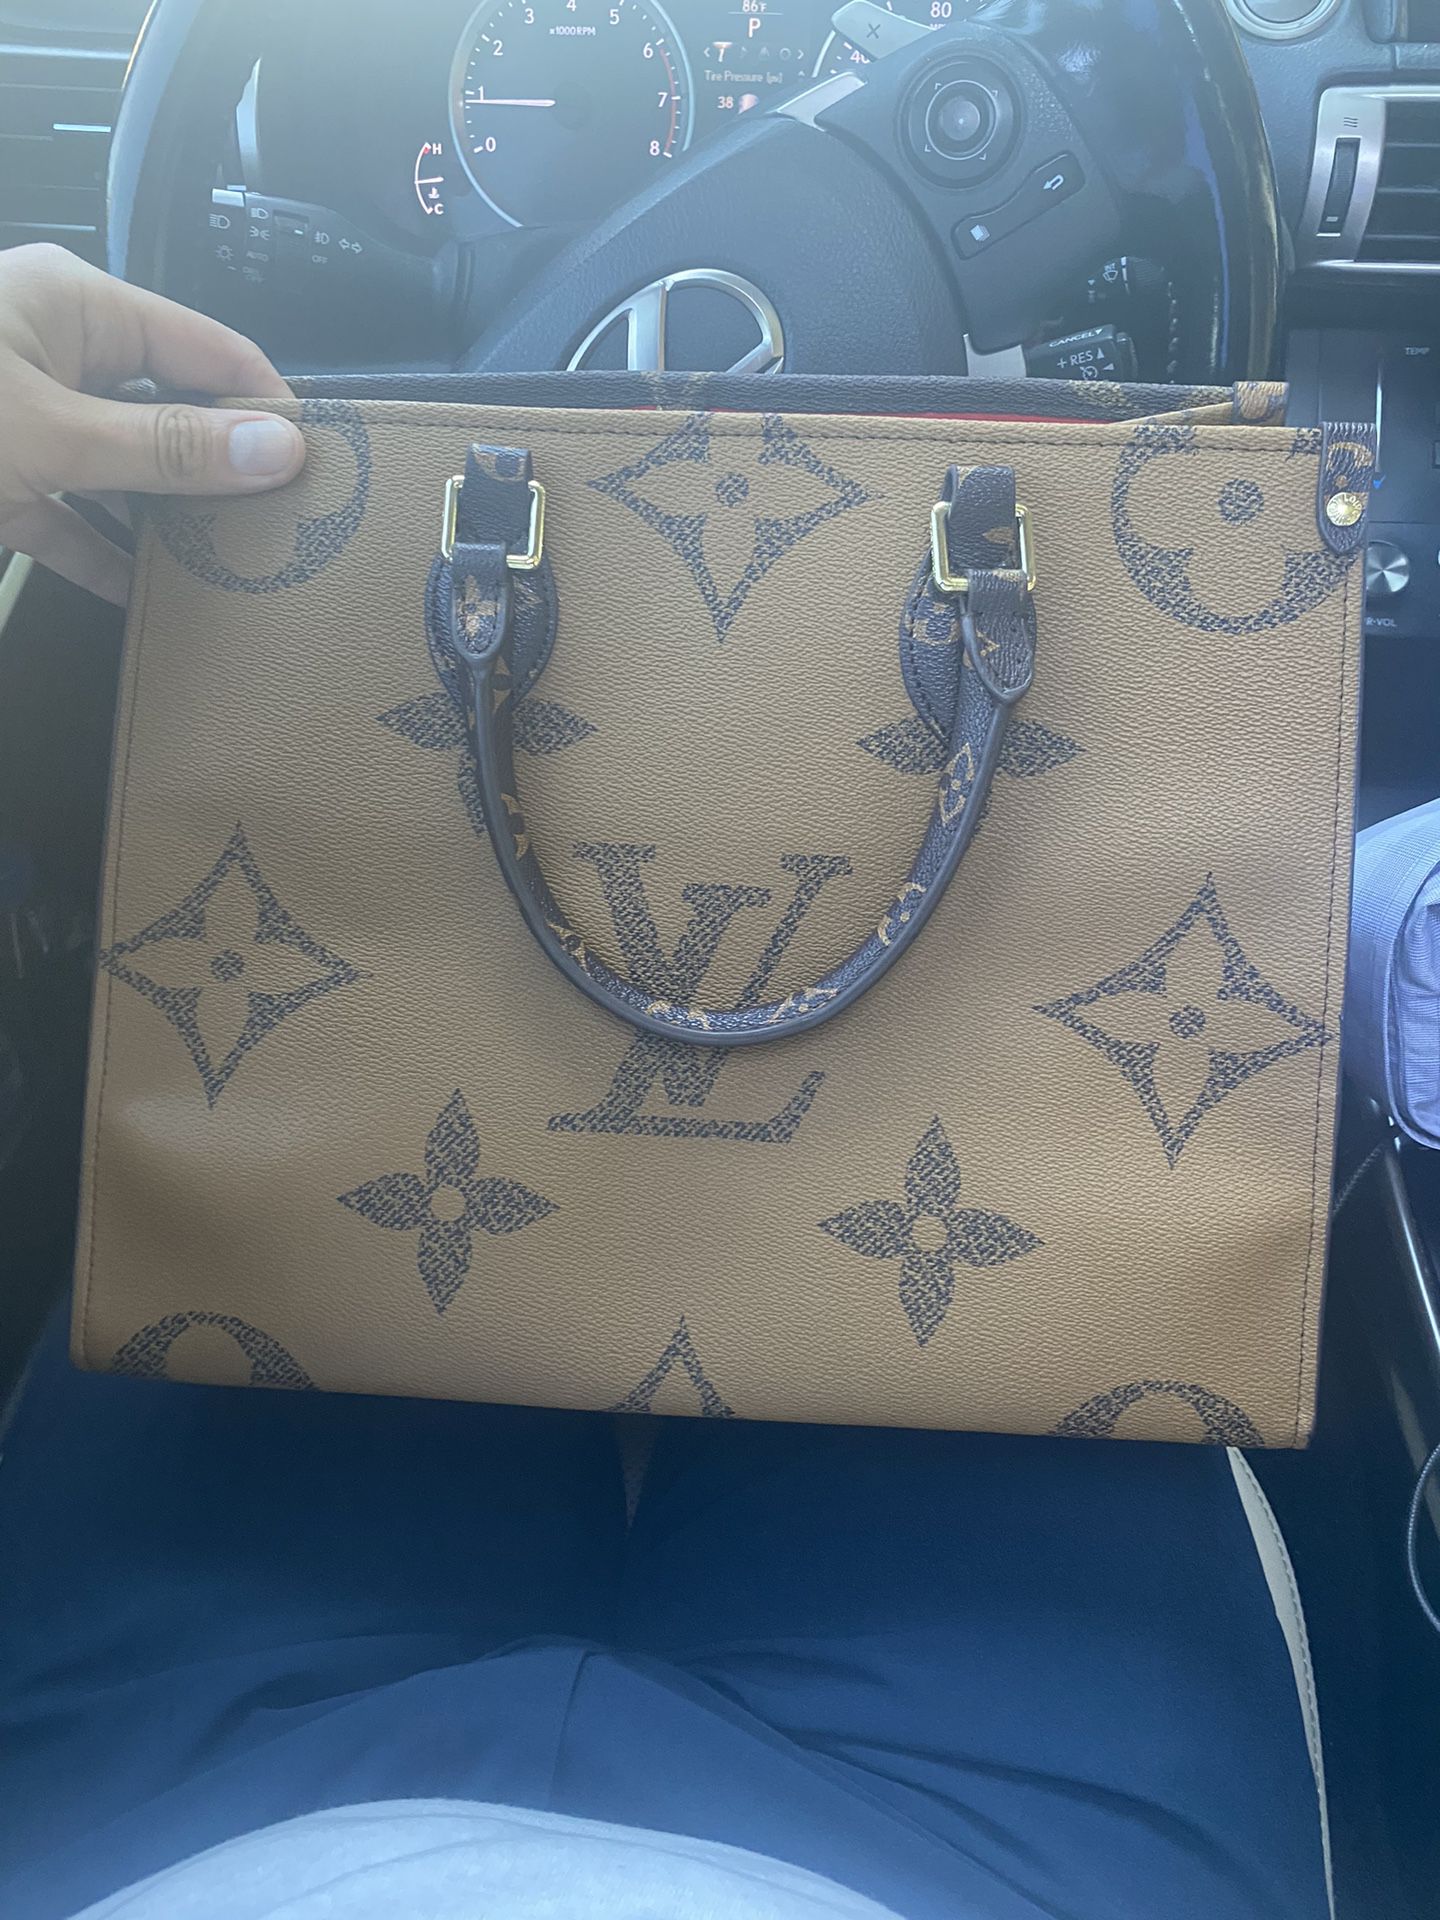 Louis Vuitton Bags for Sale in Cty Of Cmmrce, CA - OfferUp